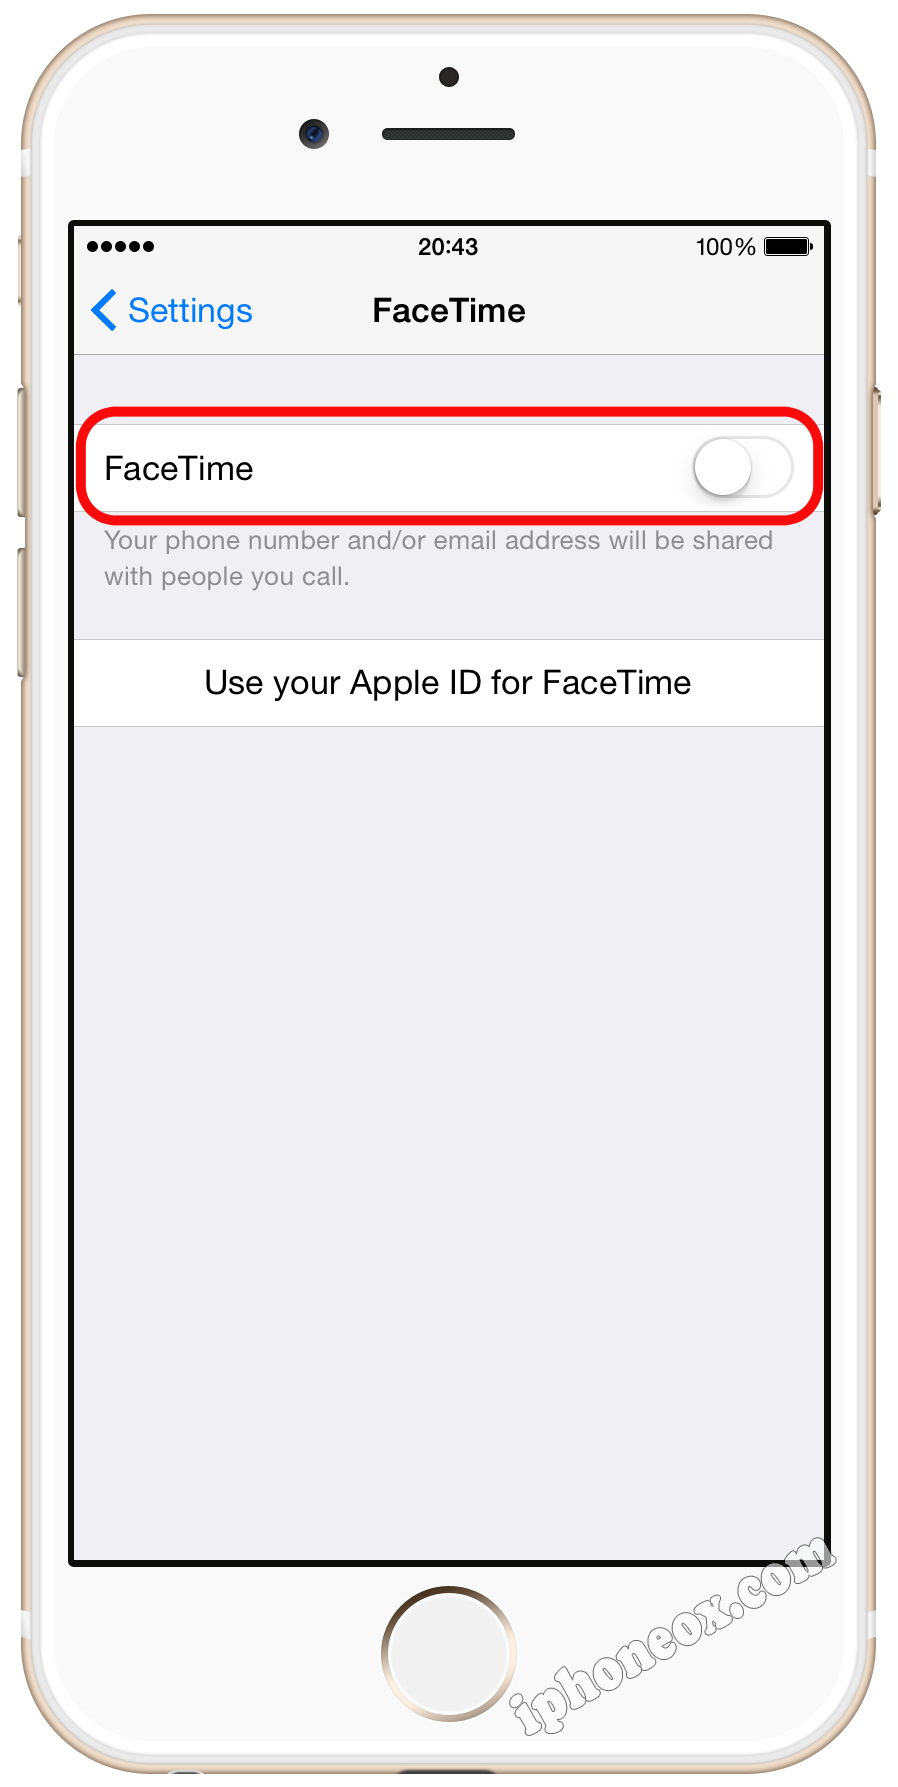 Tap Settings > iFace and turn iFace off